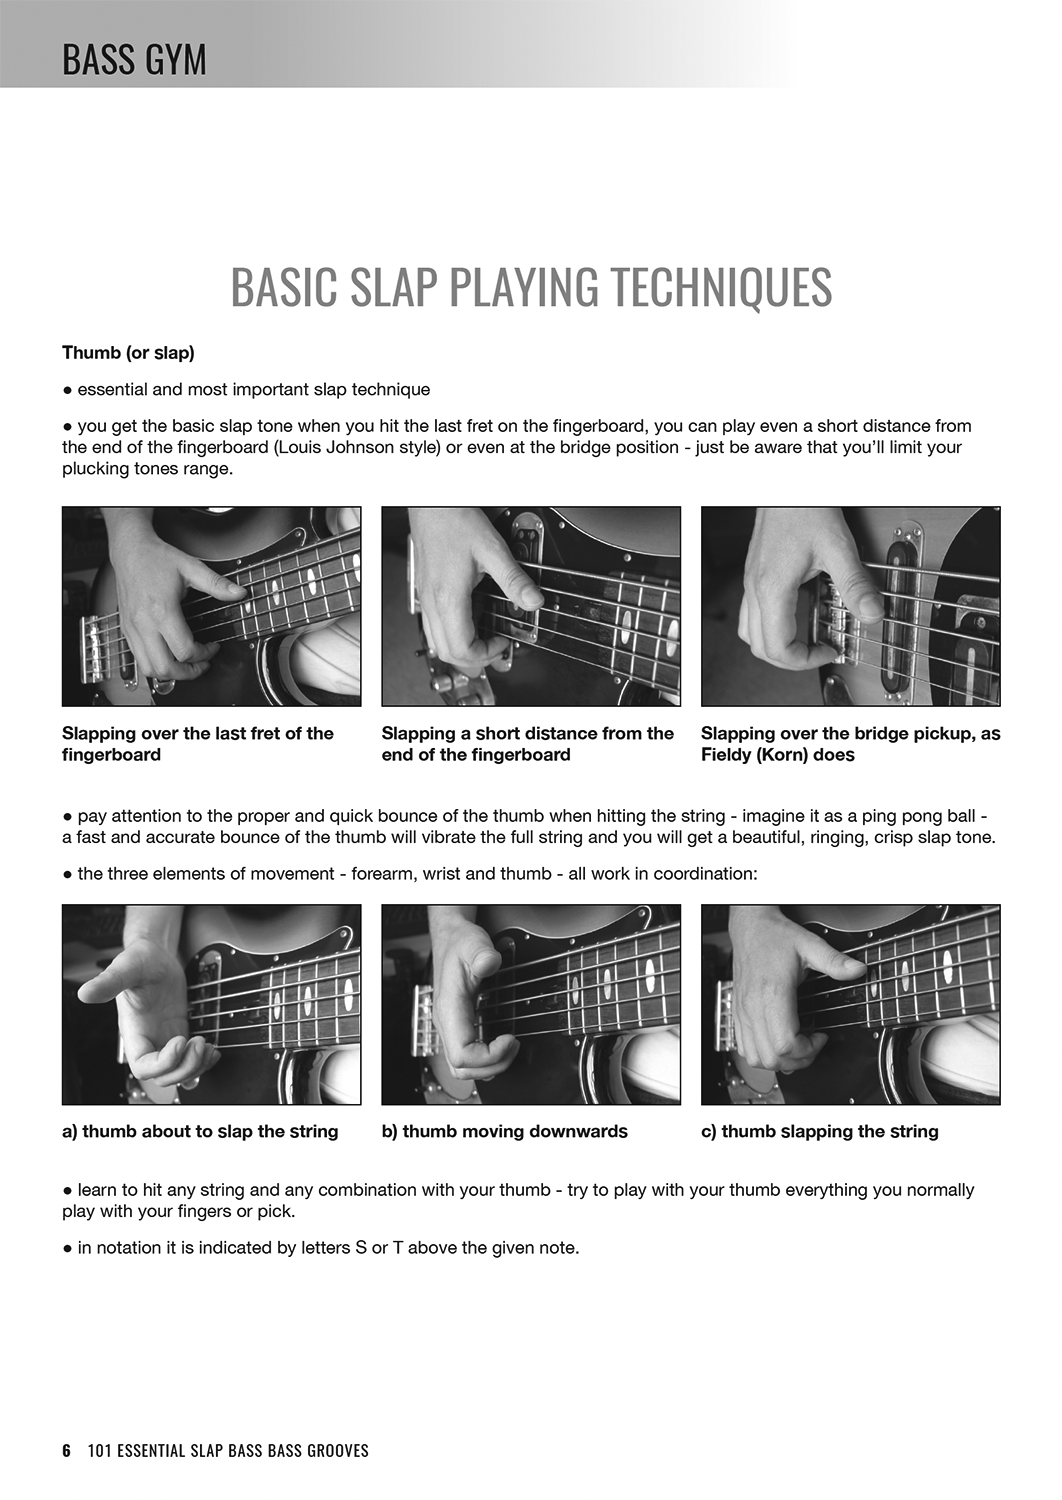 Bass Gym - 101 Essential Slap Bass Grooves - Sample Page #1